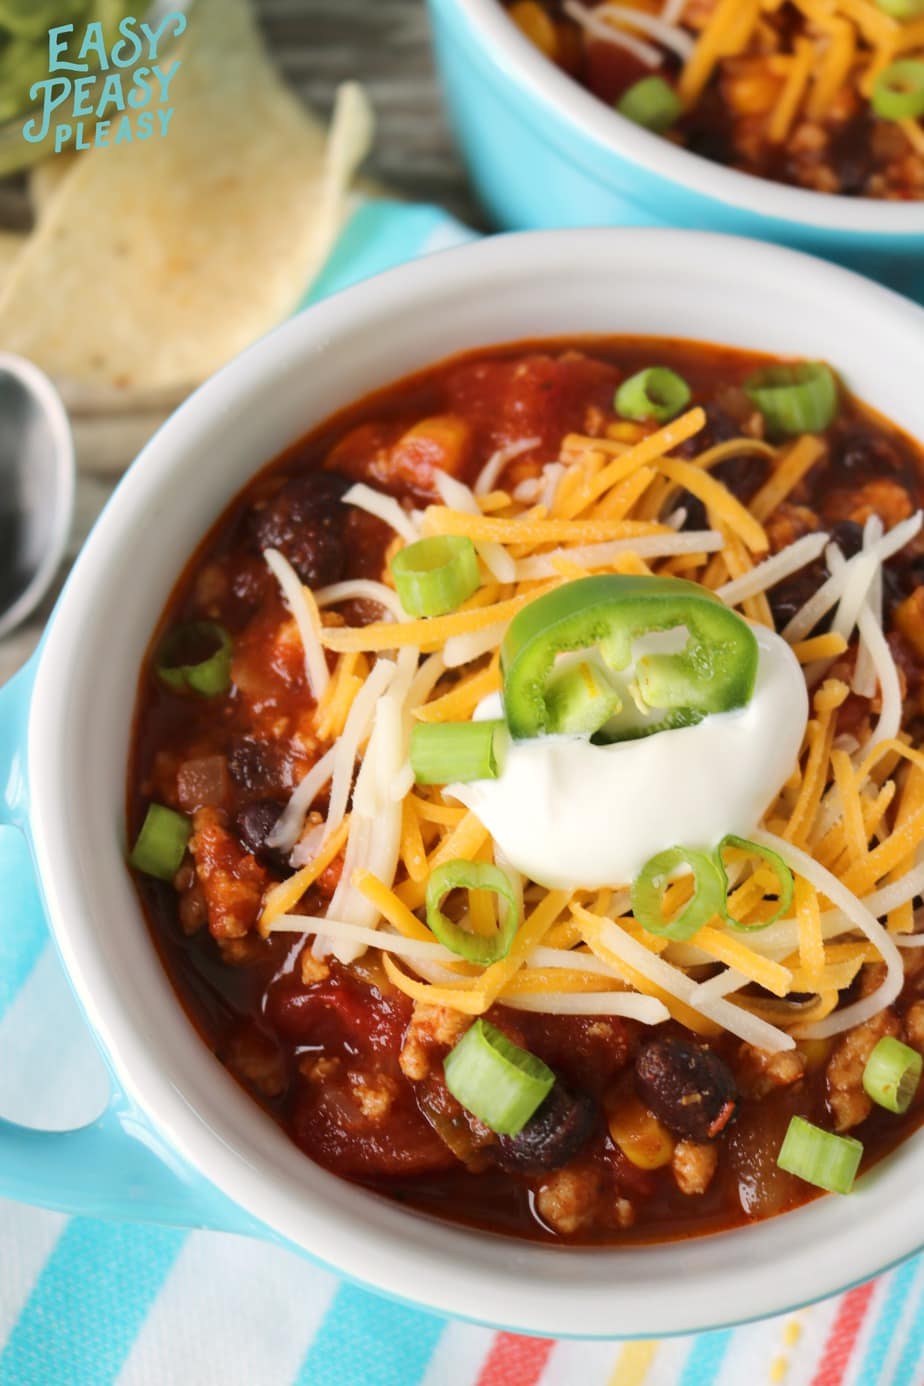 Make this easy One Pot Chicken Chili on a weeknight in no time.